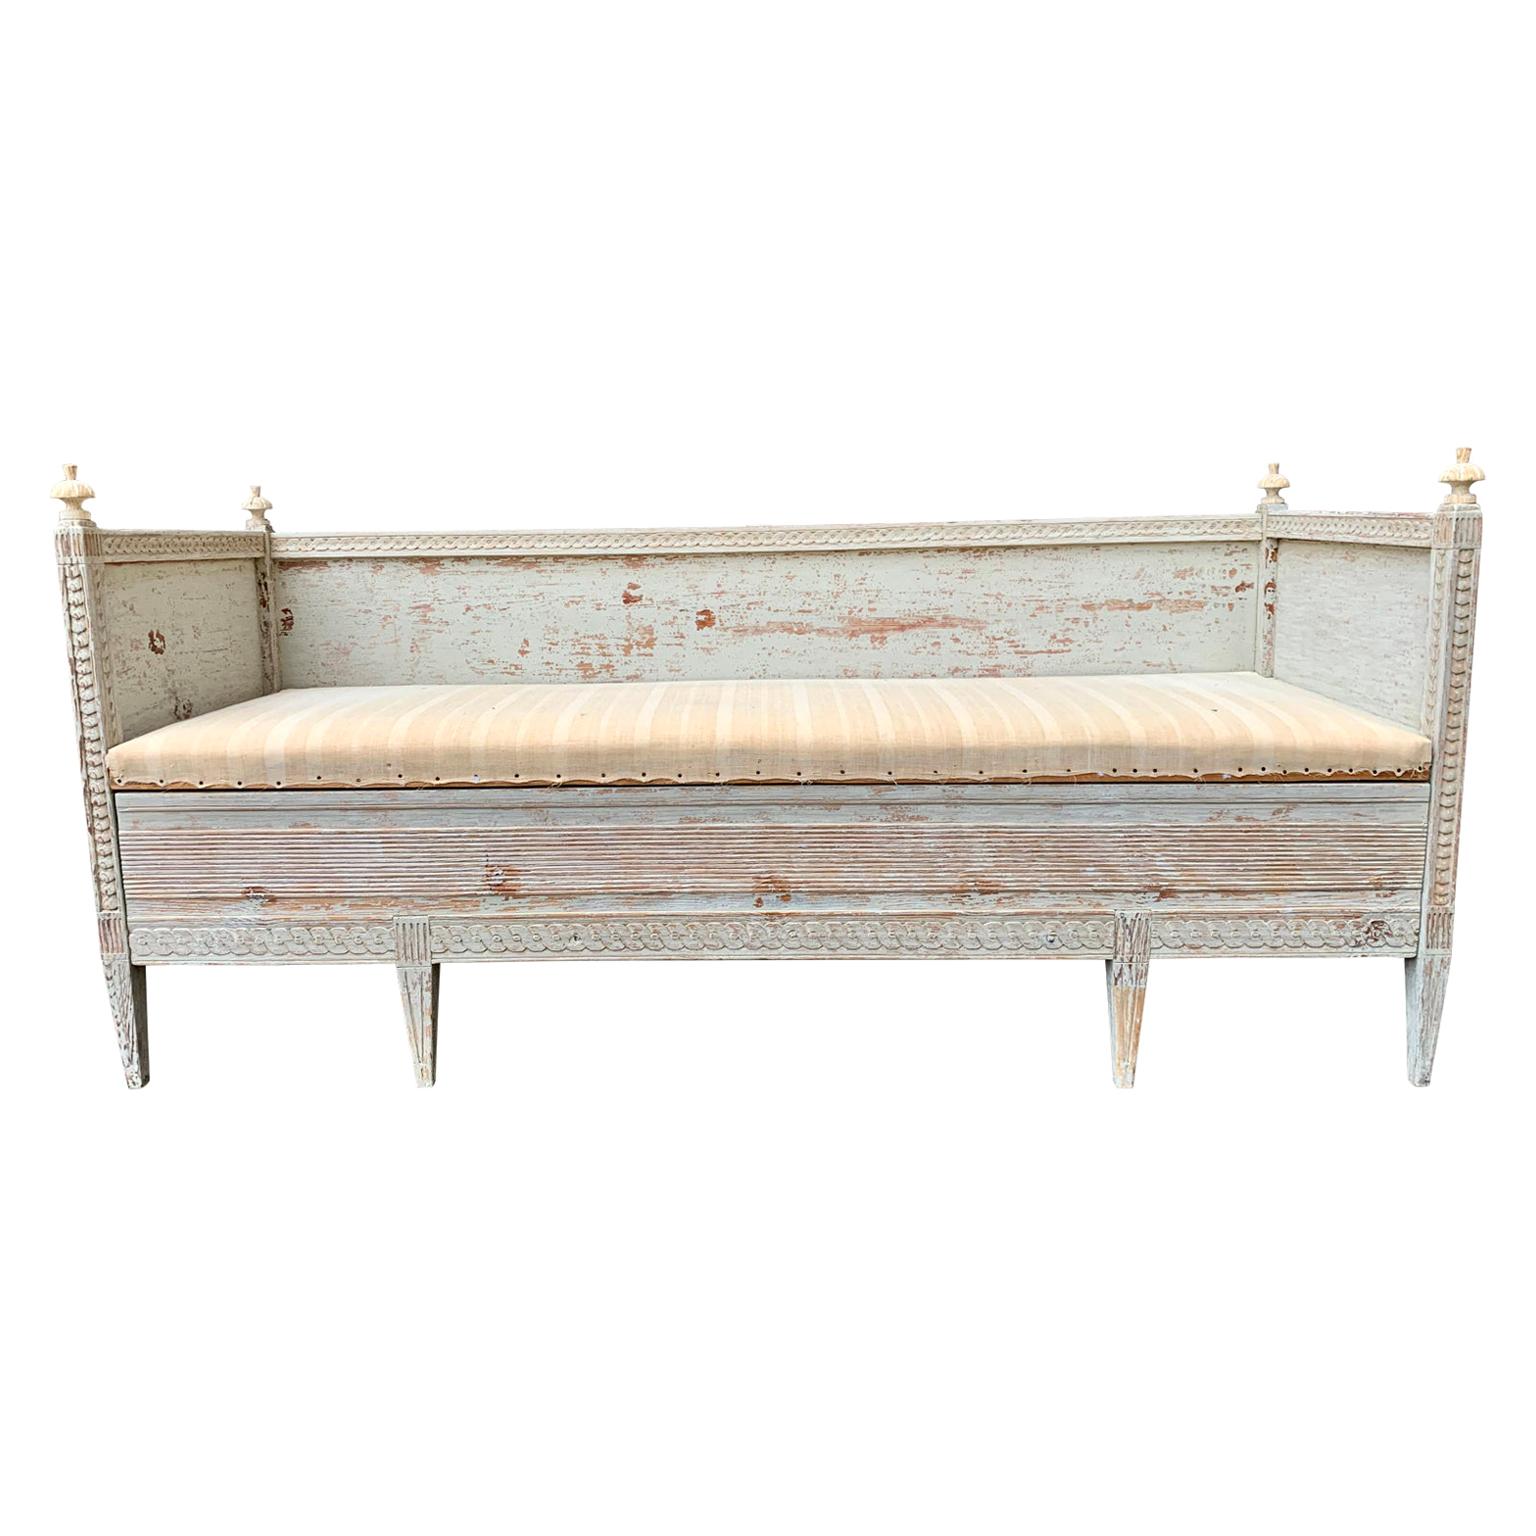 Swedish 18th Century Gustavian Sofa Bench Daybed In Old Gray Paint